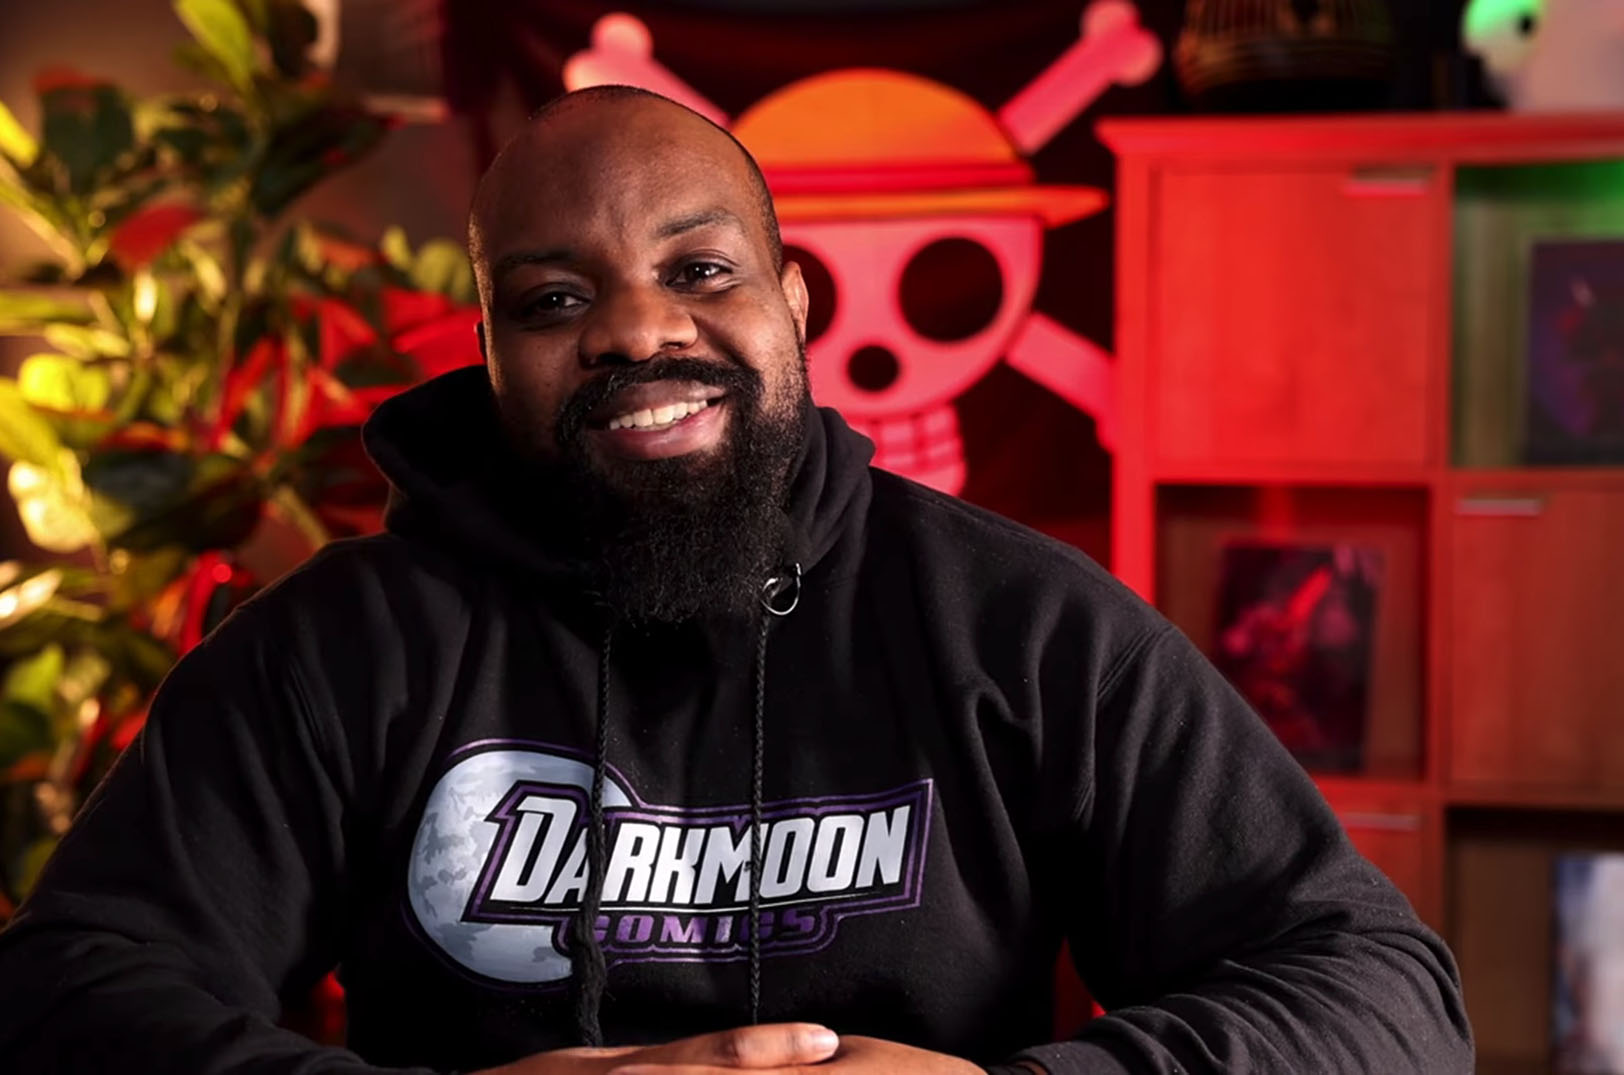 Blerdy for 30: KC comic creator’s documentary takes Black nerd culture from niche to your screen